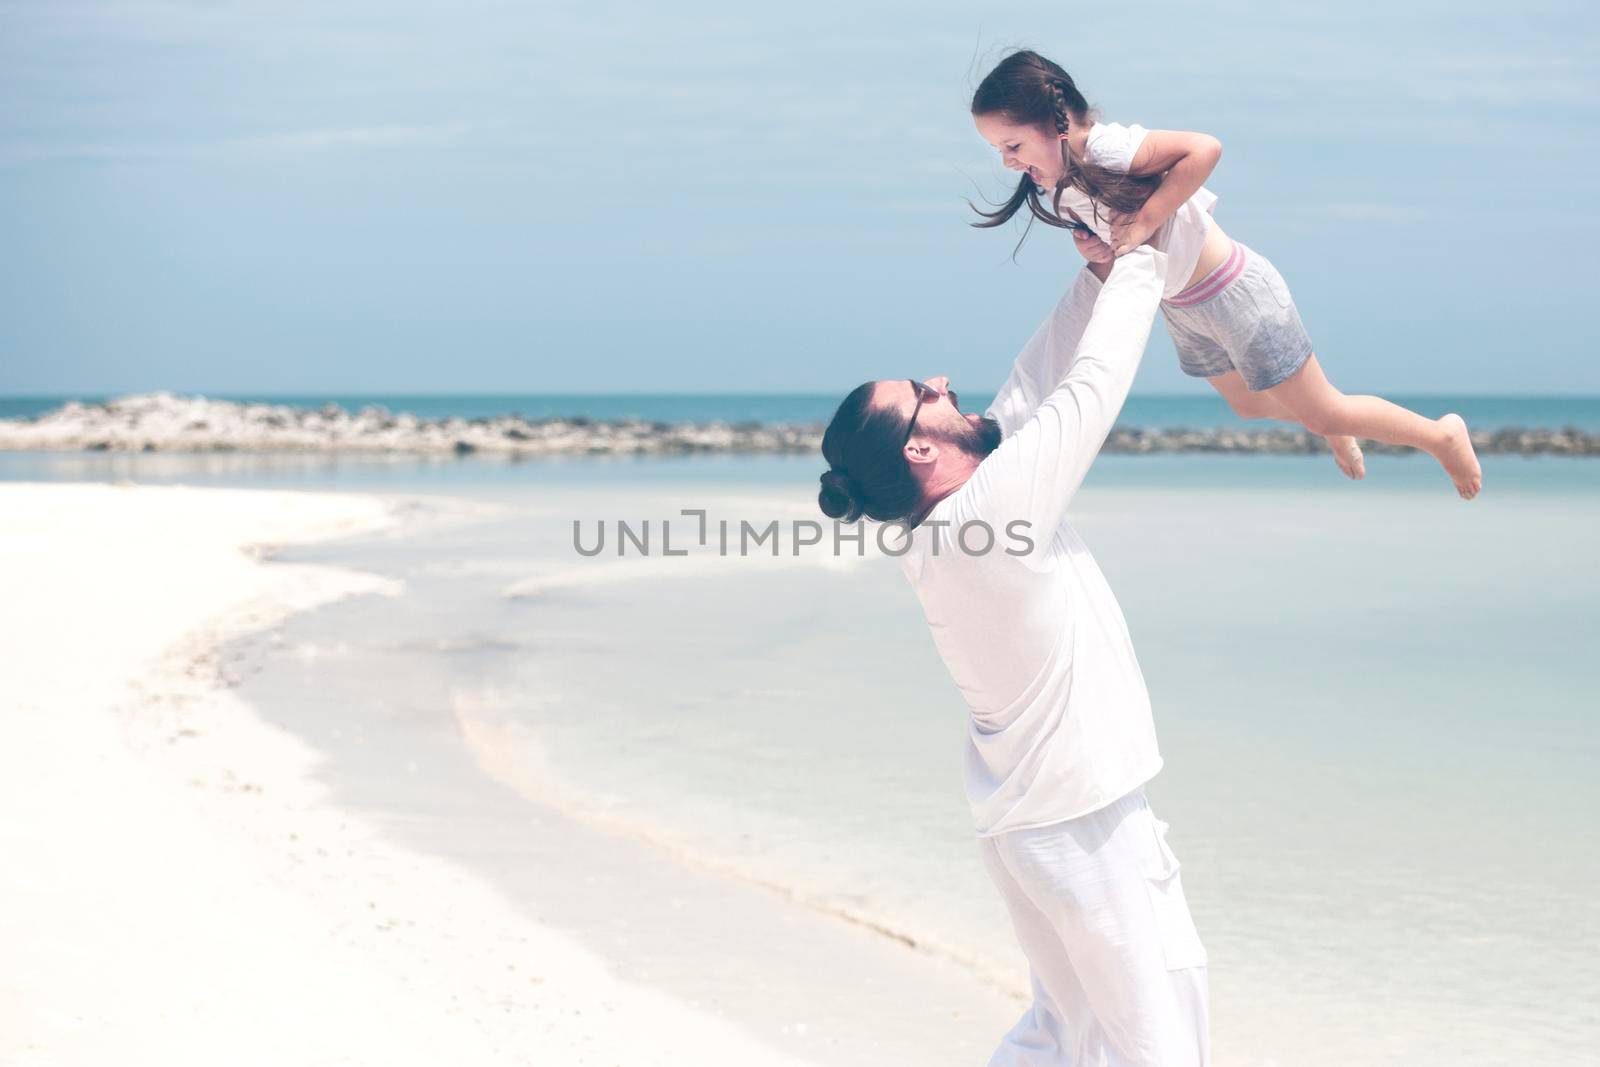 Adorable little girl holding her father hand. Healthy father and daughter playing together at the beach carefree happy fun smiling lifestyle